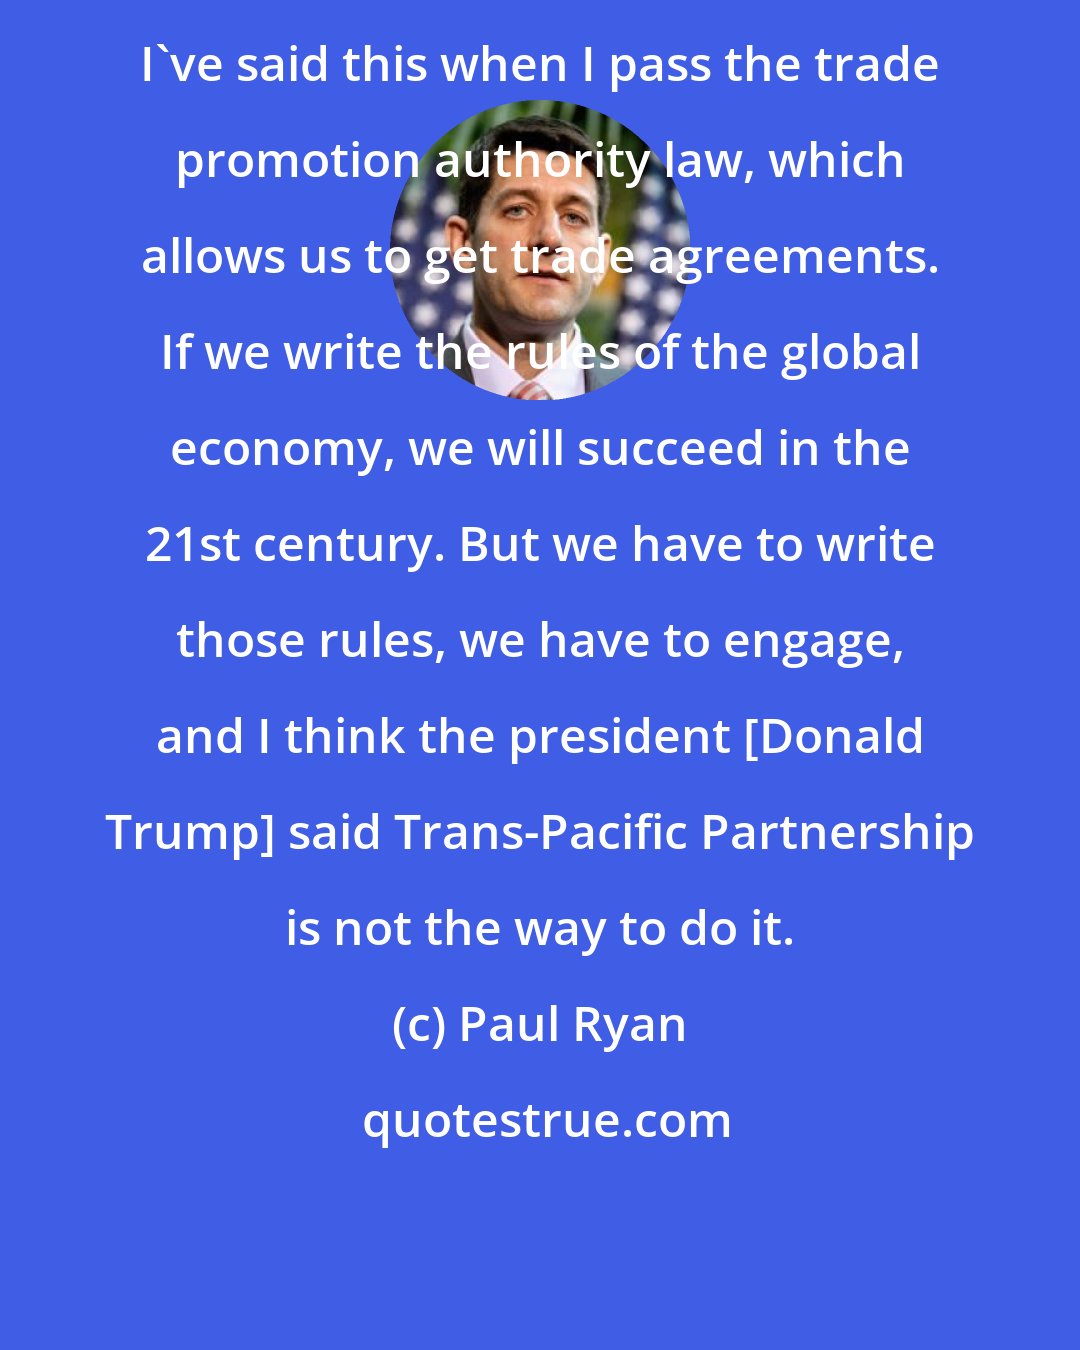 Paul Ryan: I`ve said this when I pass the trade promotion authority law, which allows us to get trade agreements. If we write the rules of the global economy, we will succeed in the 21st century. But we have to write those rules, we have to engage, and I think the president [Donald Trump] said Trans-Pacific Partnership is not the way to do it.